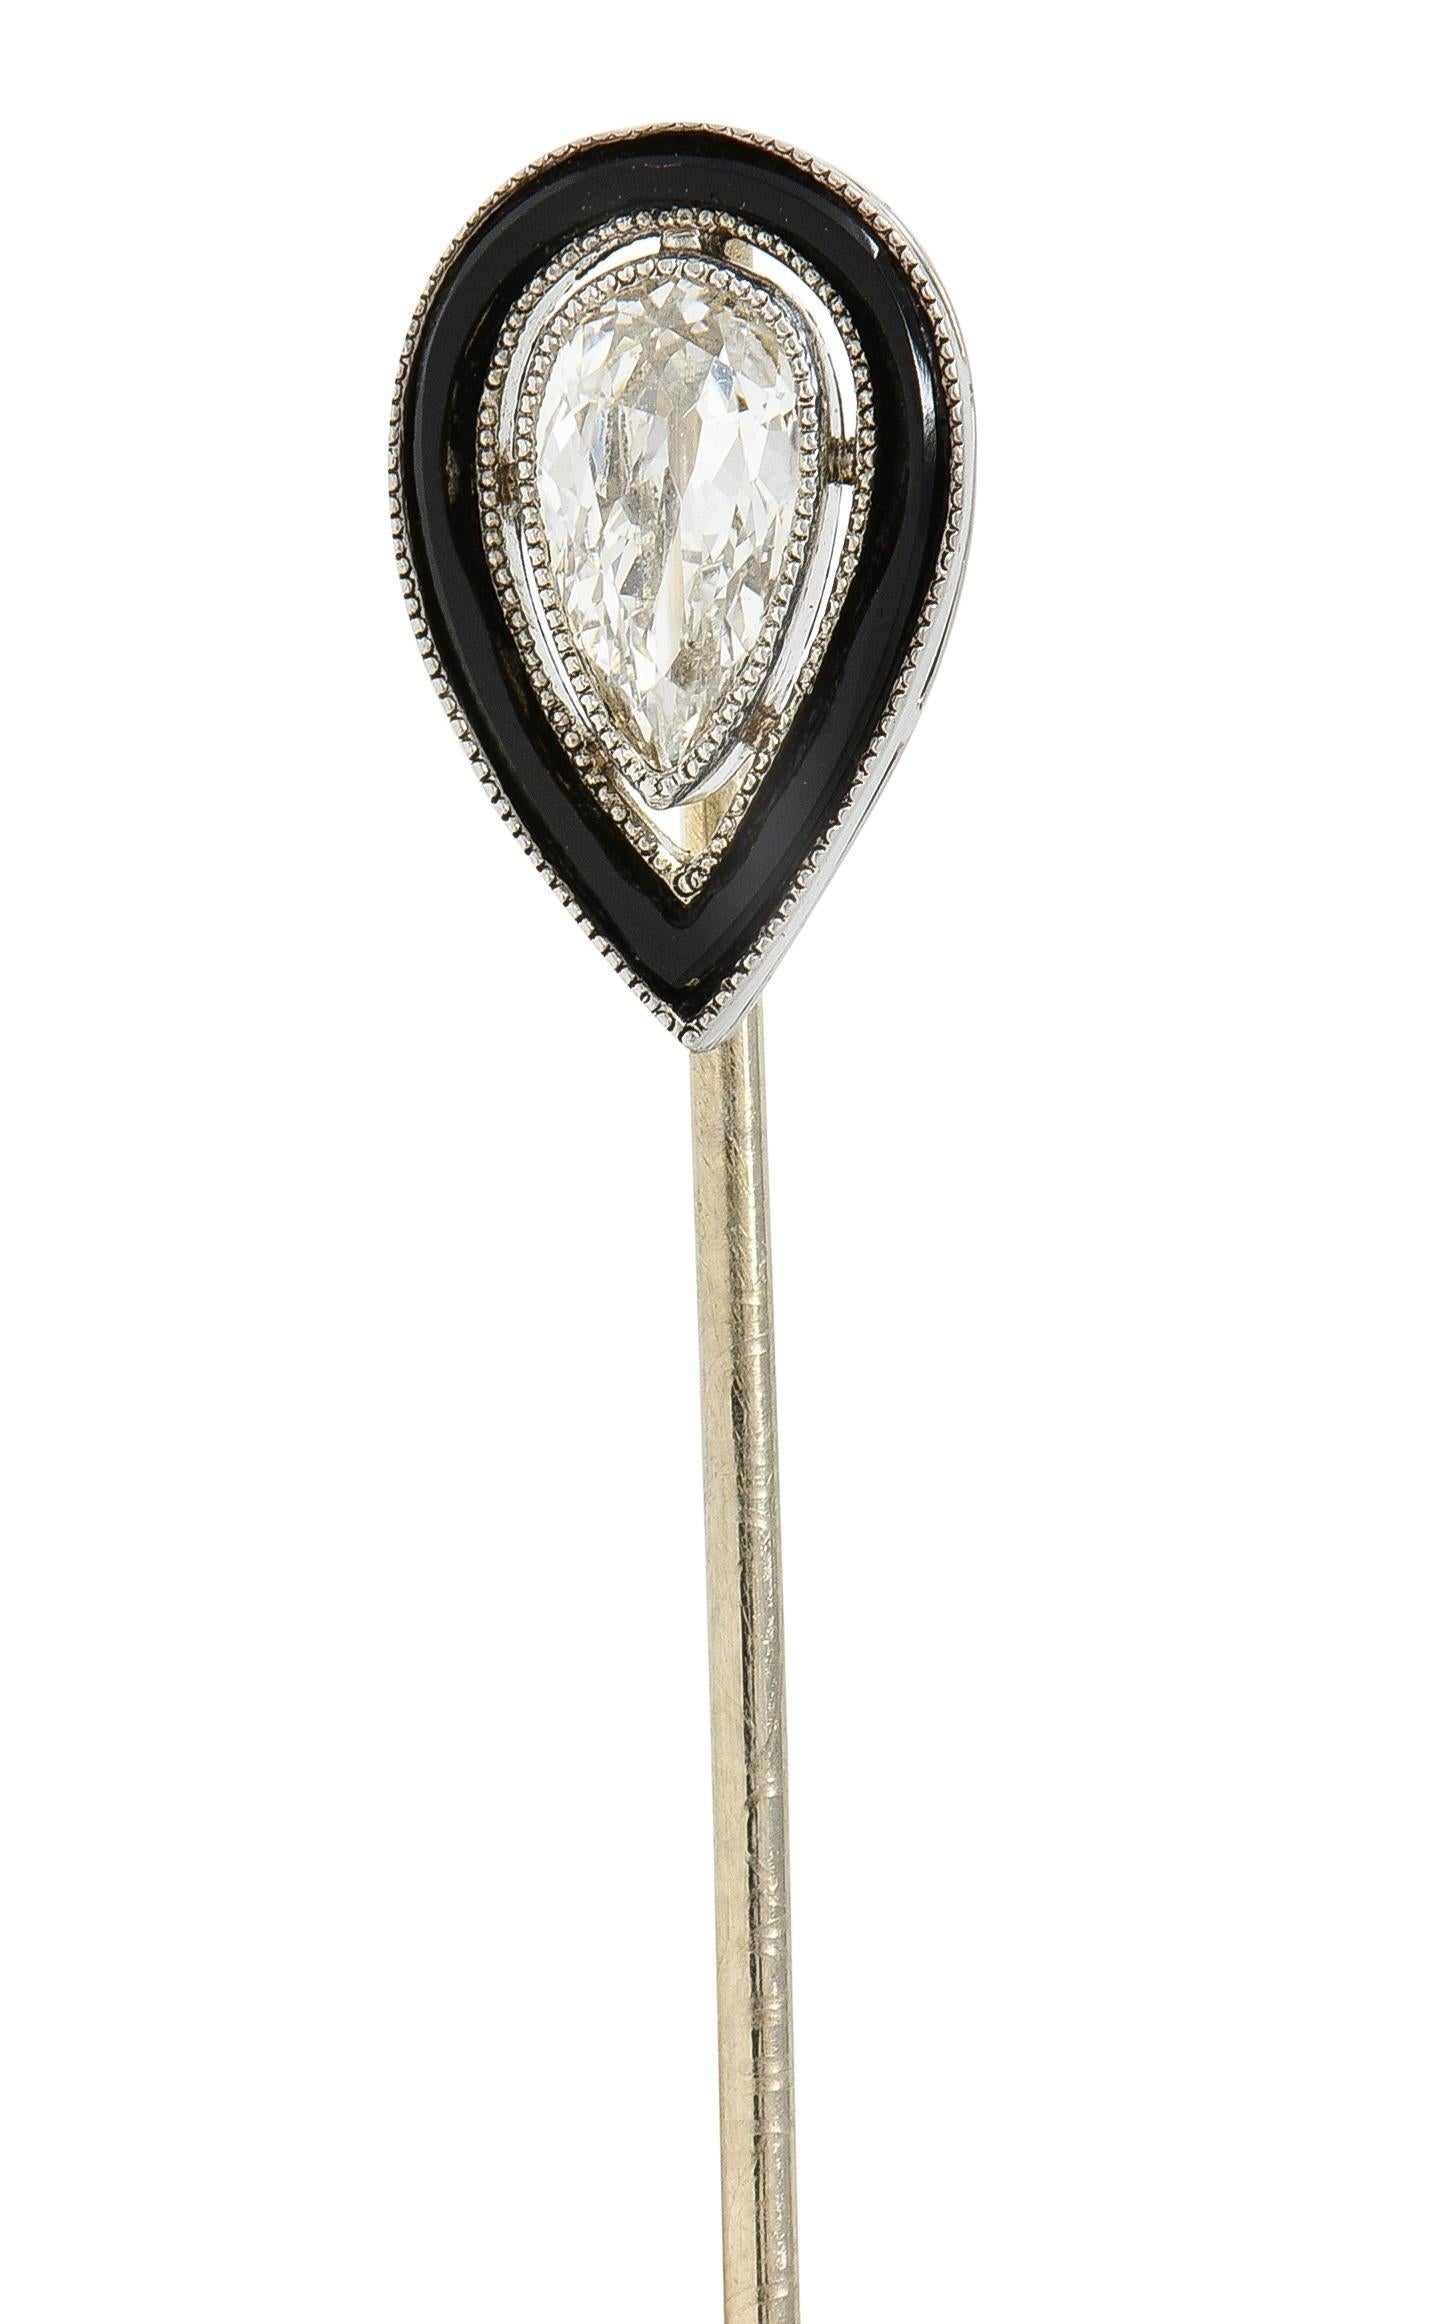 Centering a pear cut diamond weighing approximately 0.30 carat - K color with SI1 clarity
Set in miligrain detail bezel with pierced floating halo surround 
Inlaid with onyx - opaque glossy black 
Completed by pinstem 
Head tested as